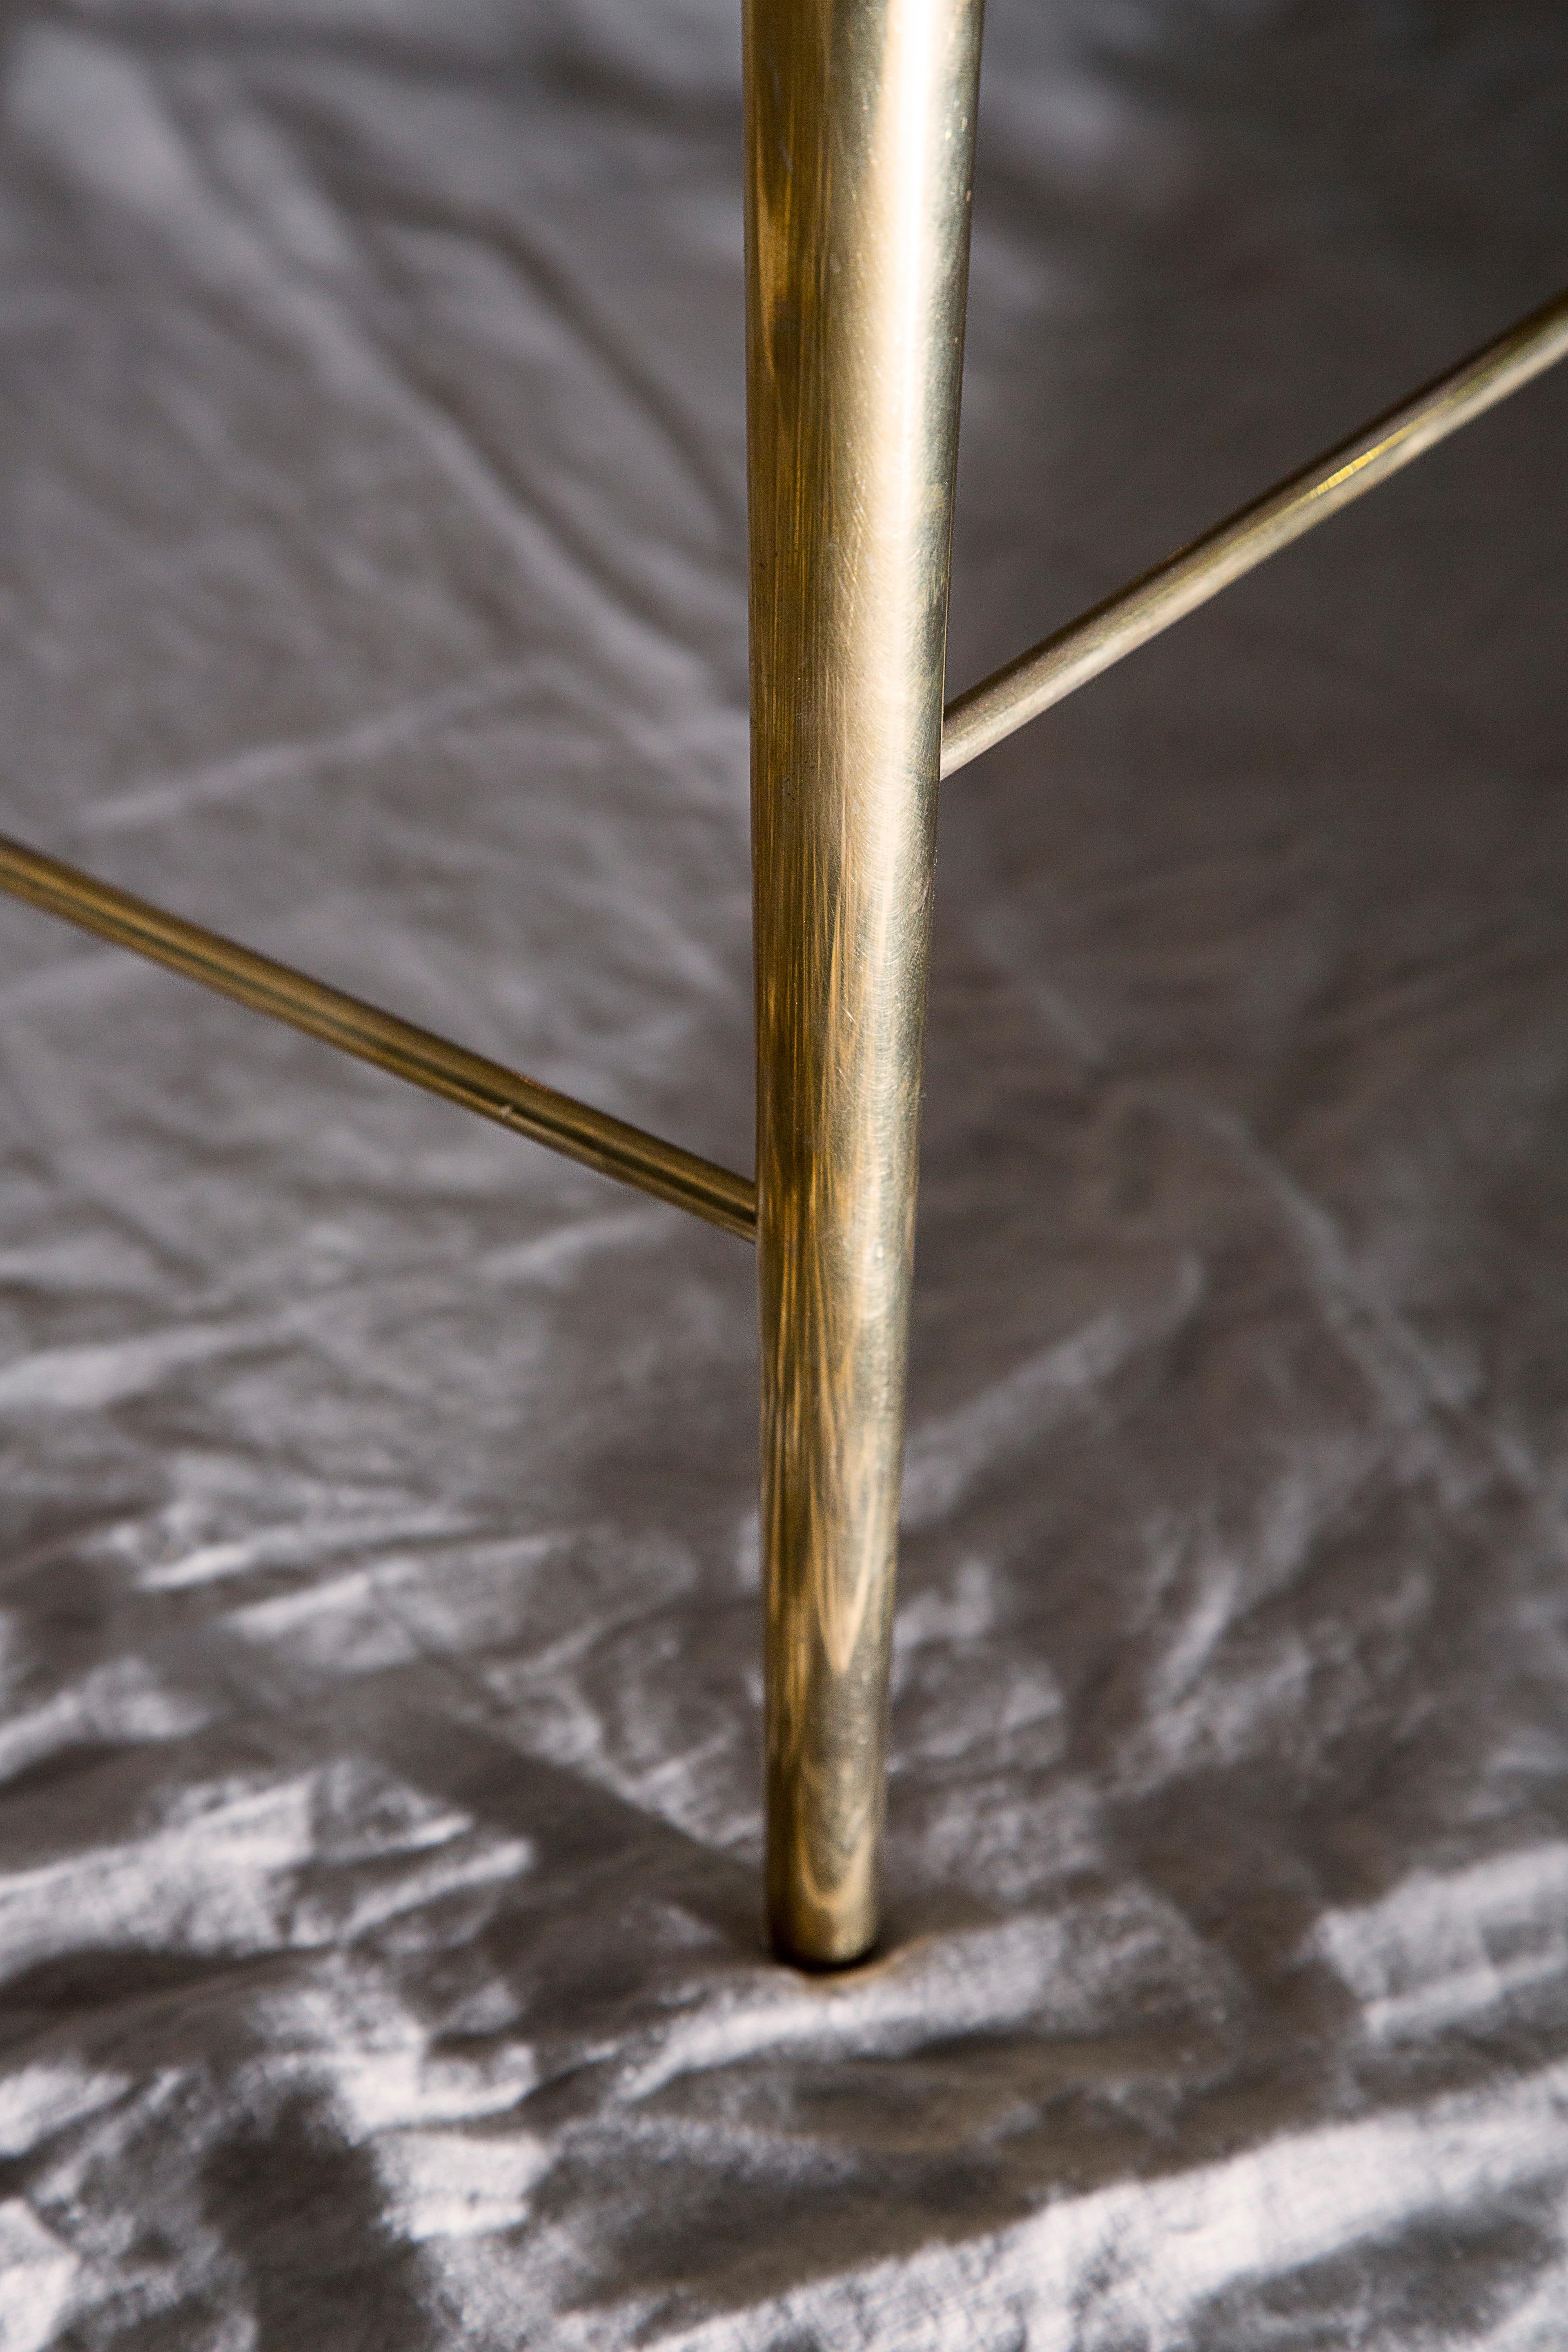 Stud Coffee Table in Rosso Marble and Polished Brass — Large In New Condition For Sale In London, GB